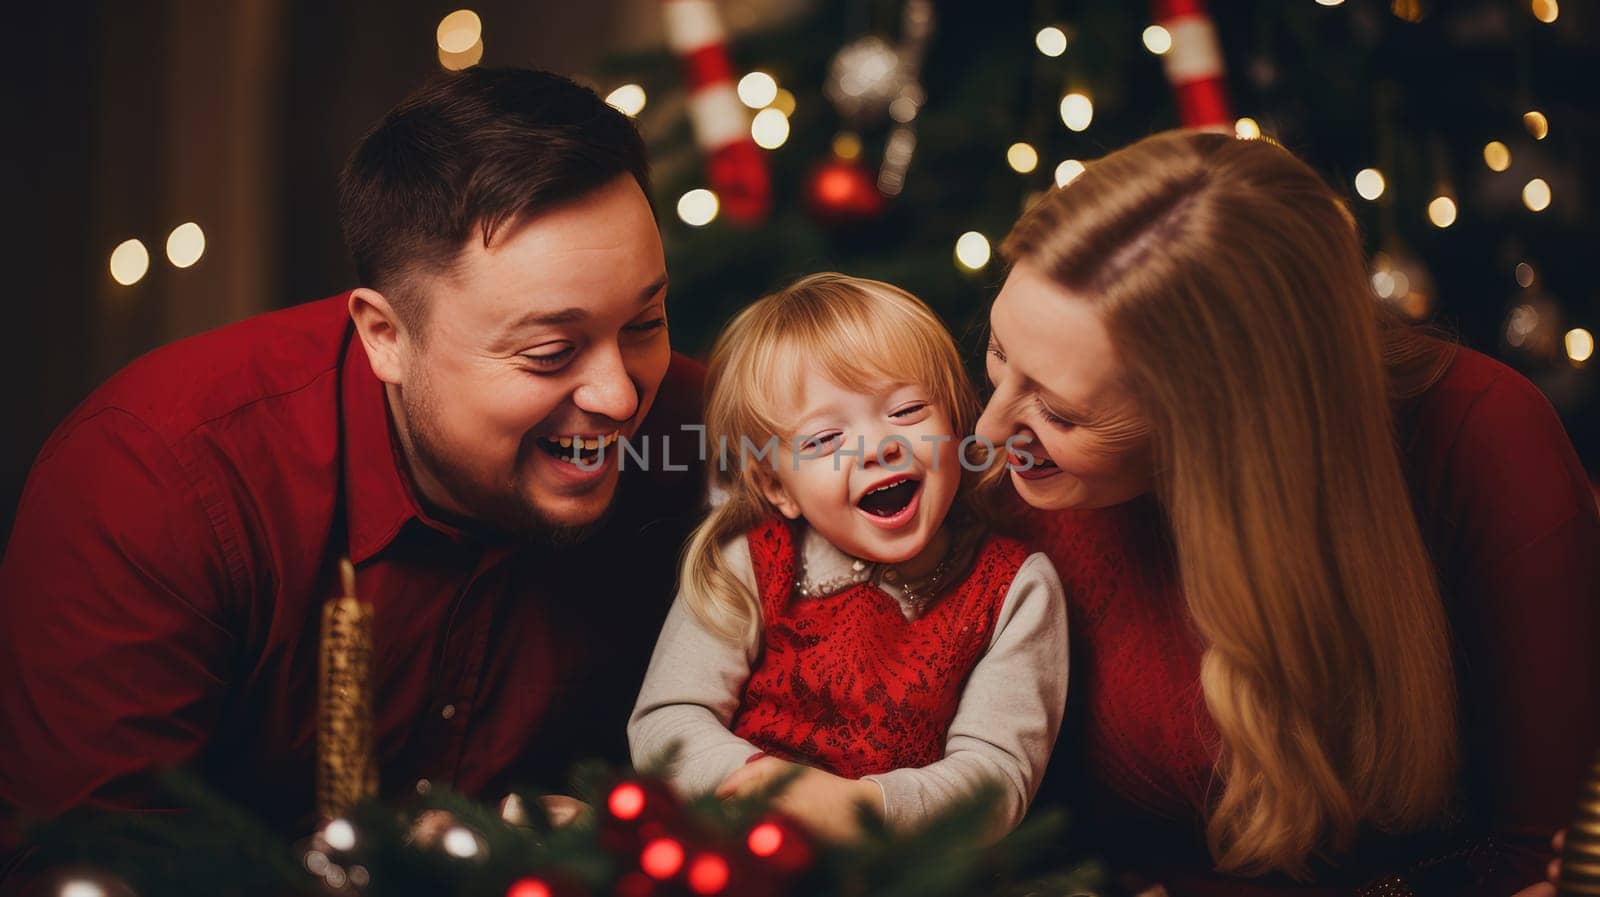 Happy family with a child with Down syndrome and parents against the background of a New Year's tree, people with disabilities. Merry Christmas and Merry New Year concept.